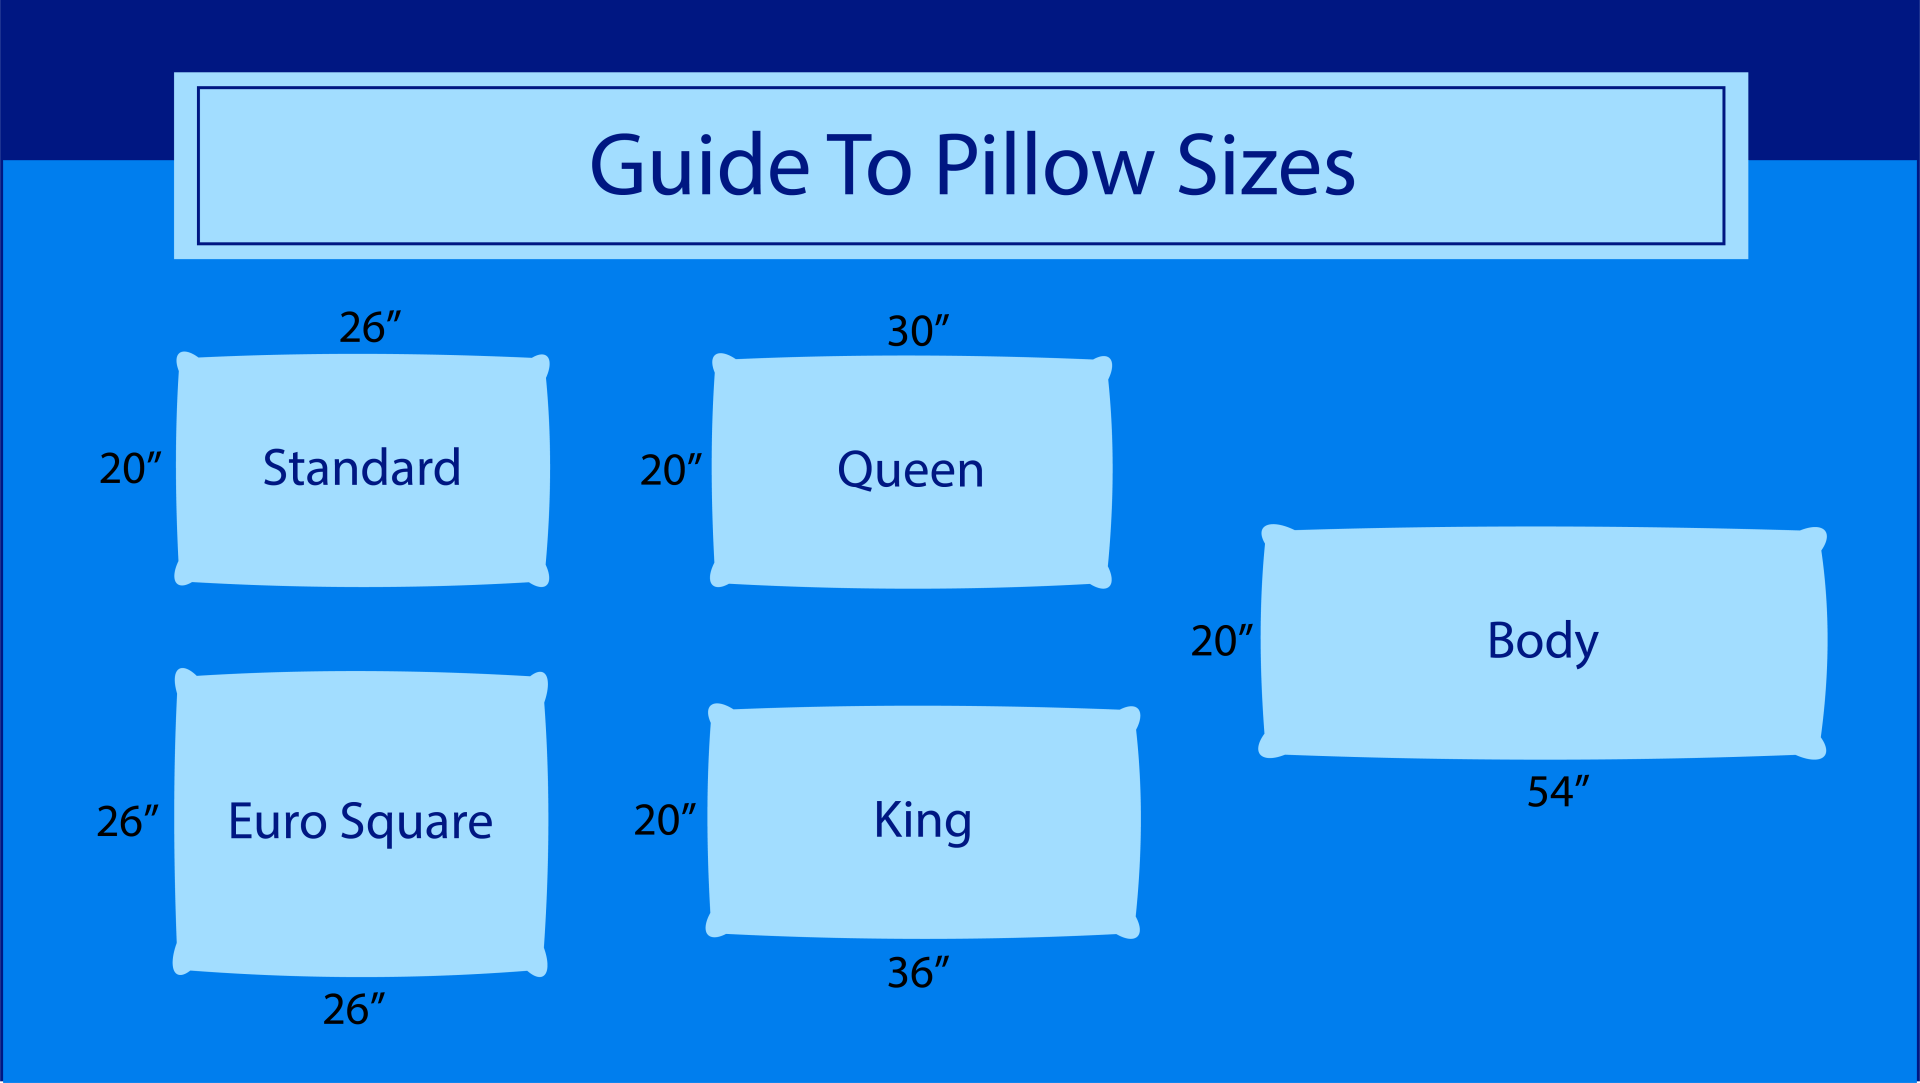 Standard Body Pillow Size | peacecommission.kdsg.gov.ng